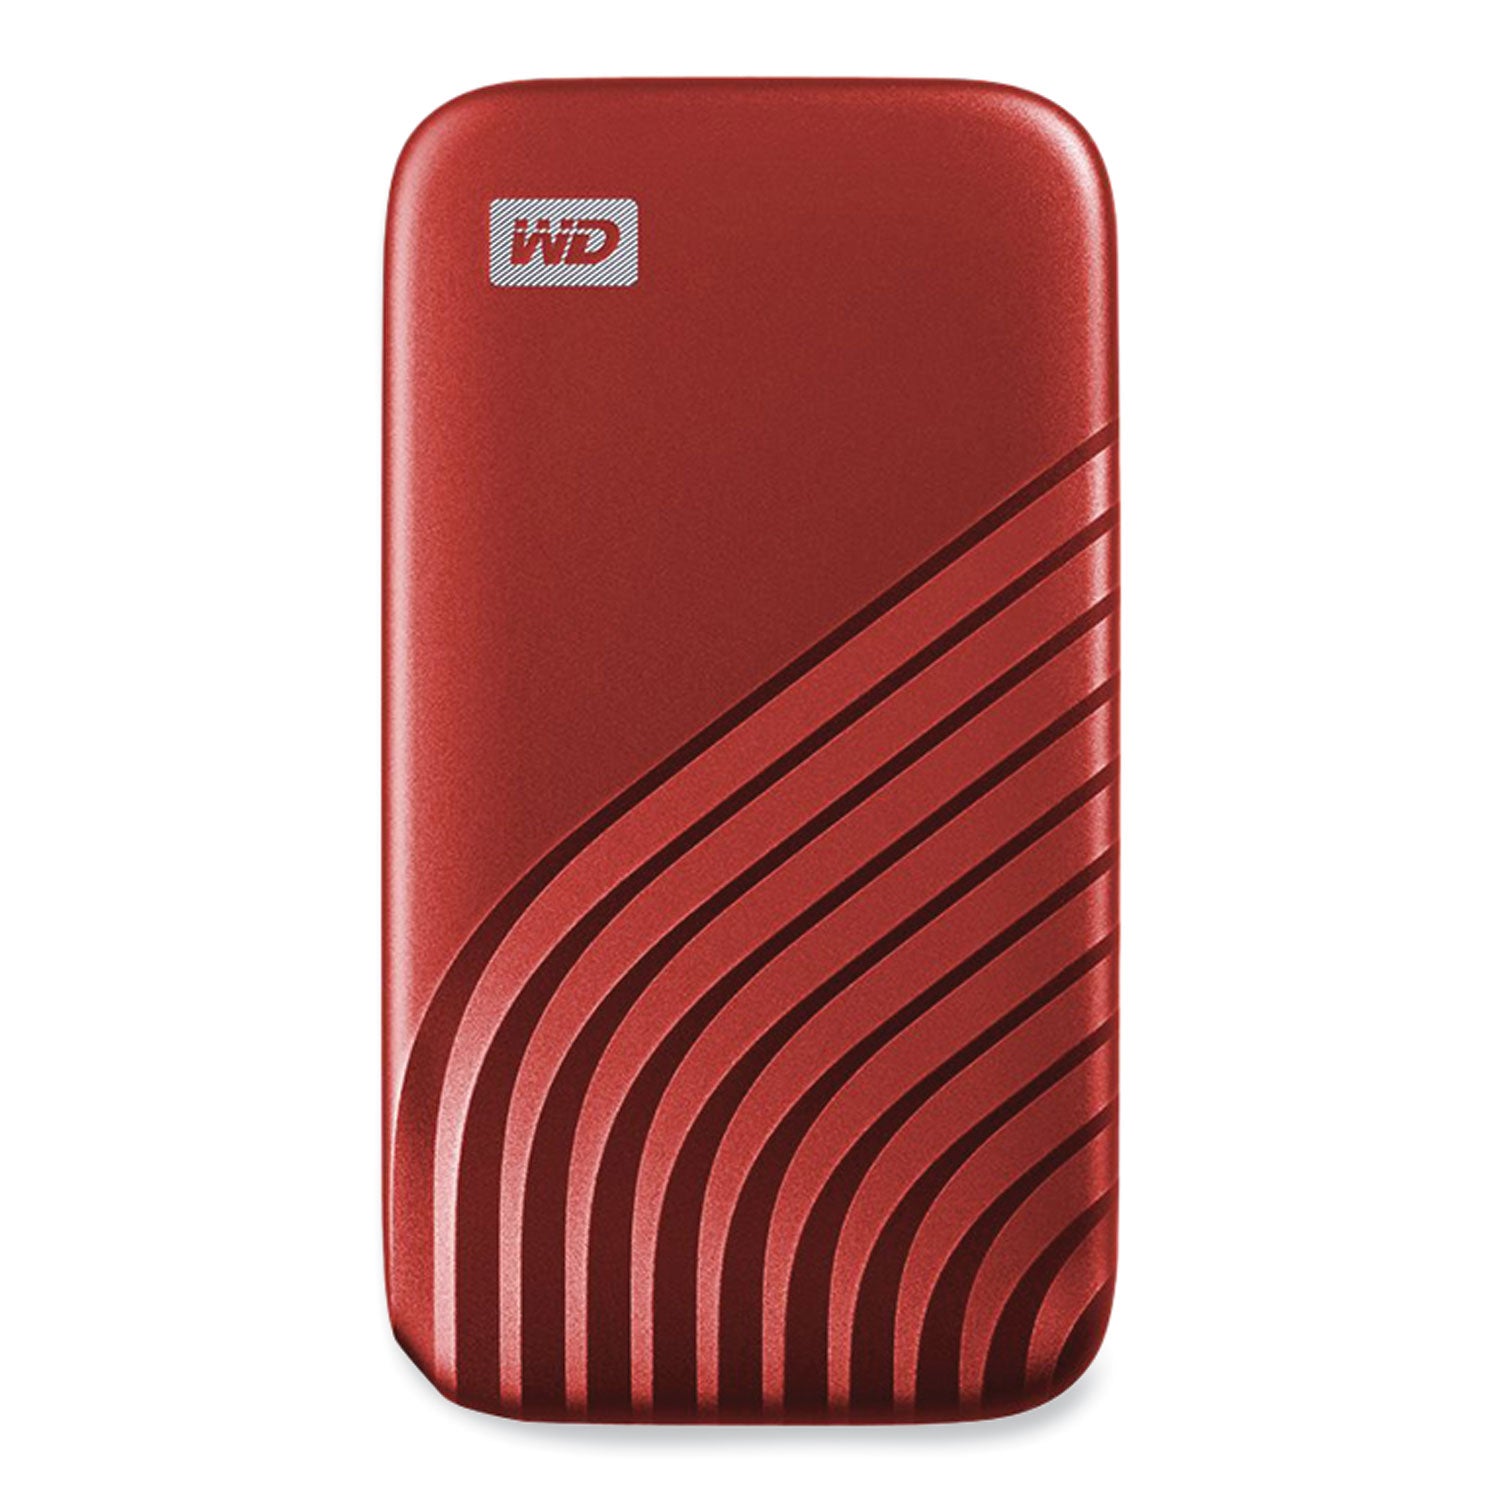 my-passport-external-solid-state-drive-1-tb-usb-32-red_wdcagf0010brd - 1